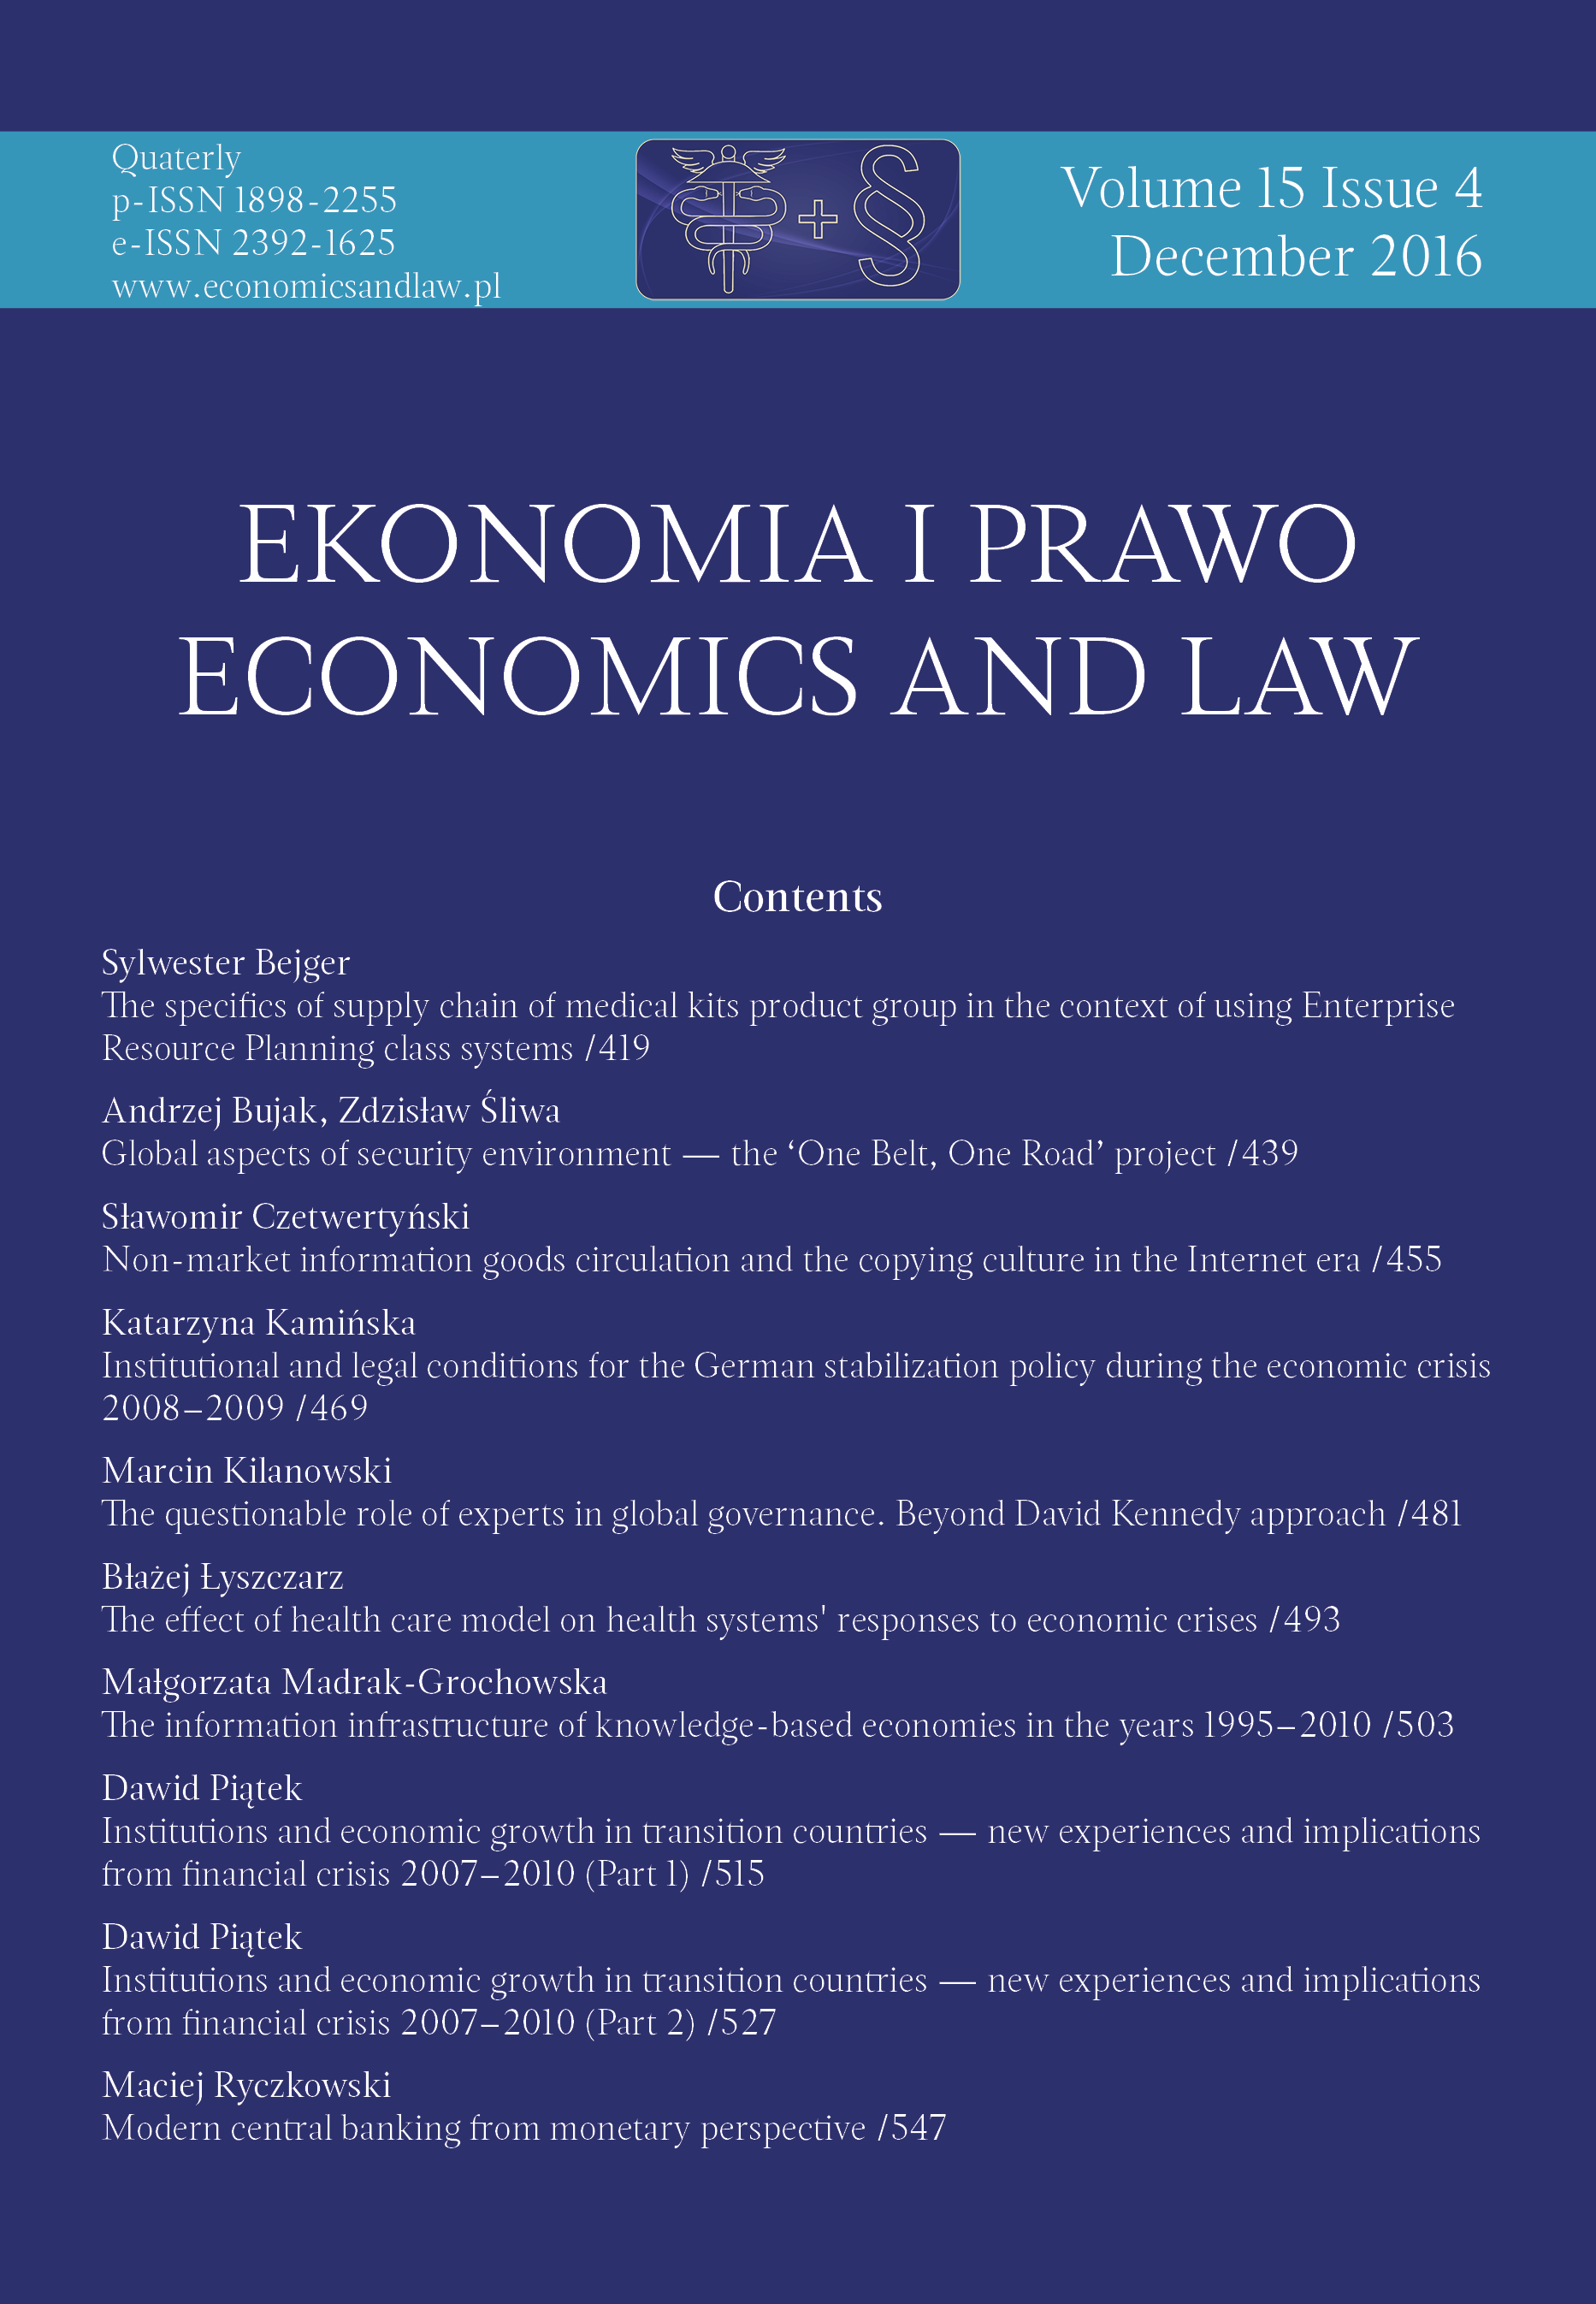 Institutions and economic growth in transition countries — new experiences and implications from financial crisis 2007–2010 (Part 2) Cover Image